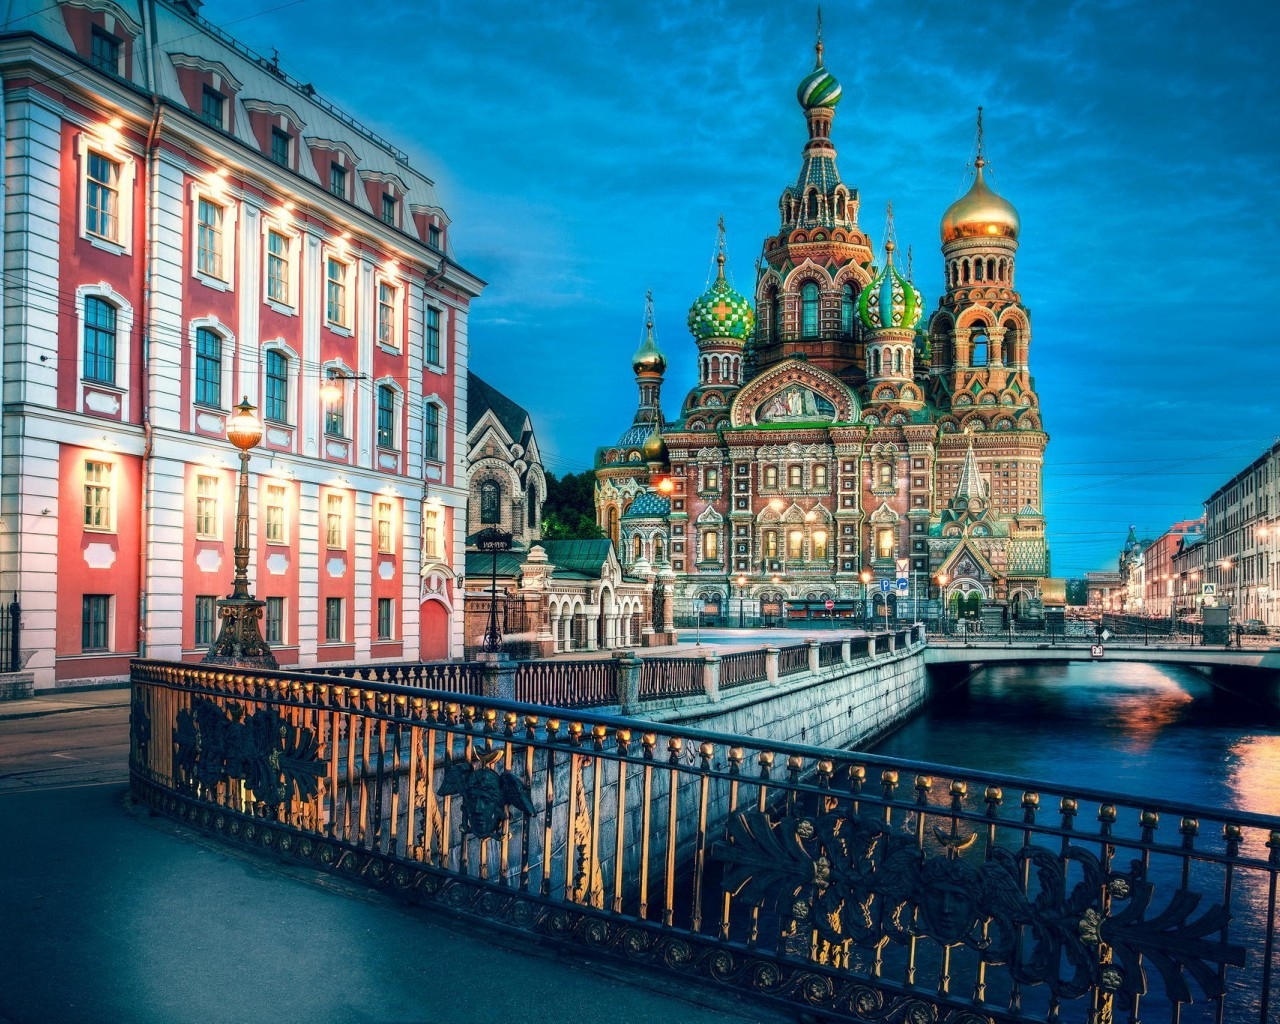 Church of the Savior on Spilled Blood for 1280 x 1024 resolution